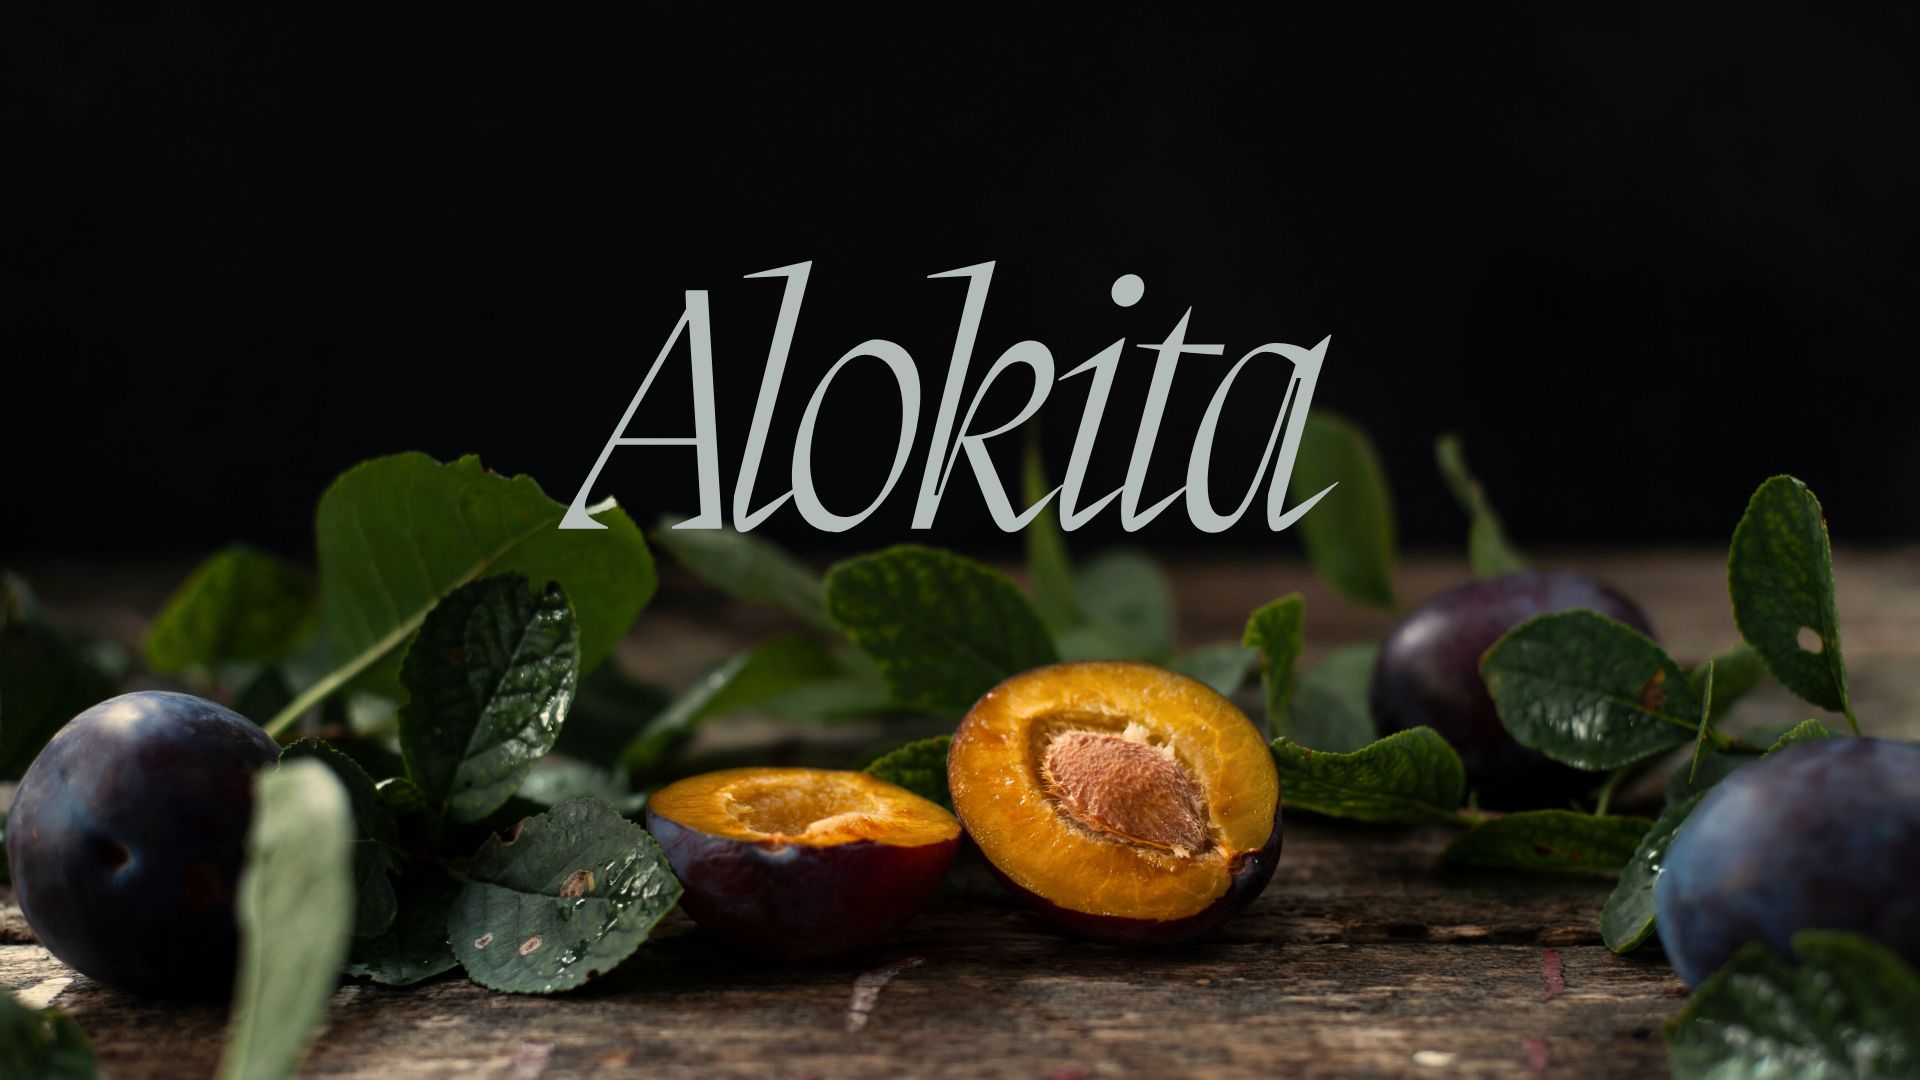 Alokita Concept Identity Design for a Still Life Photography​​​​​​​ Studio by Rajrupa Biswas